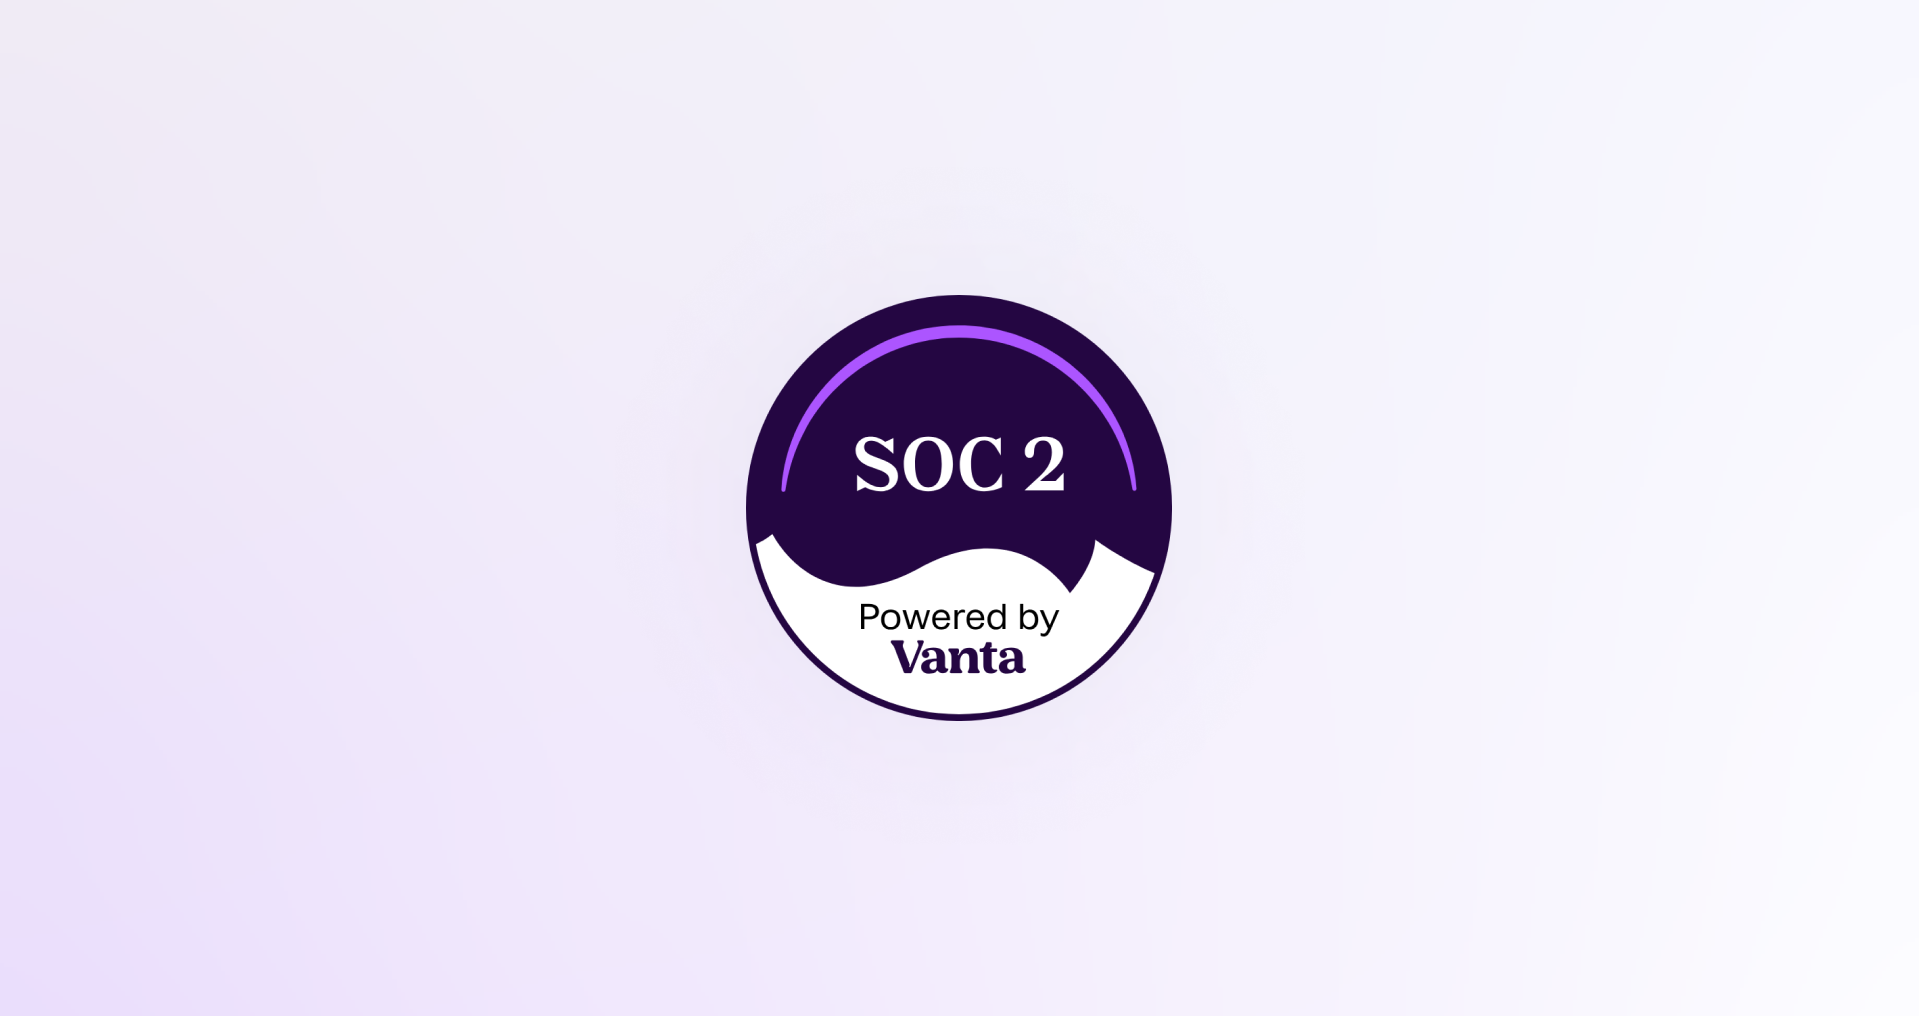 How we got SOC 2 certified in 3 months